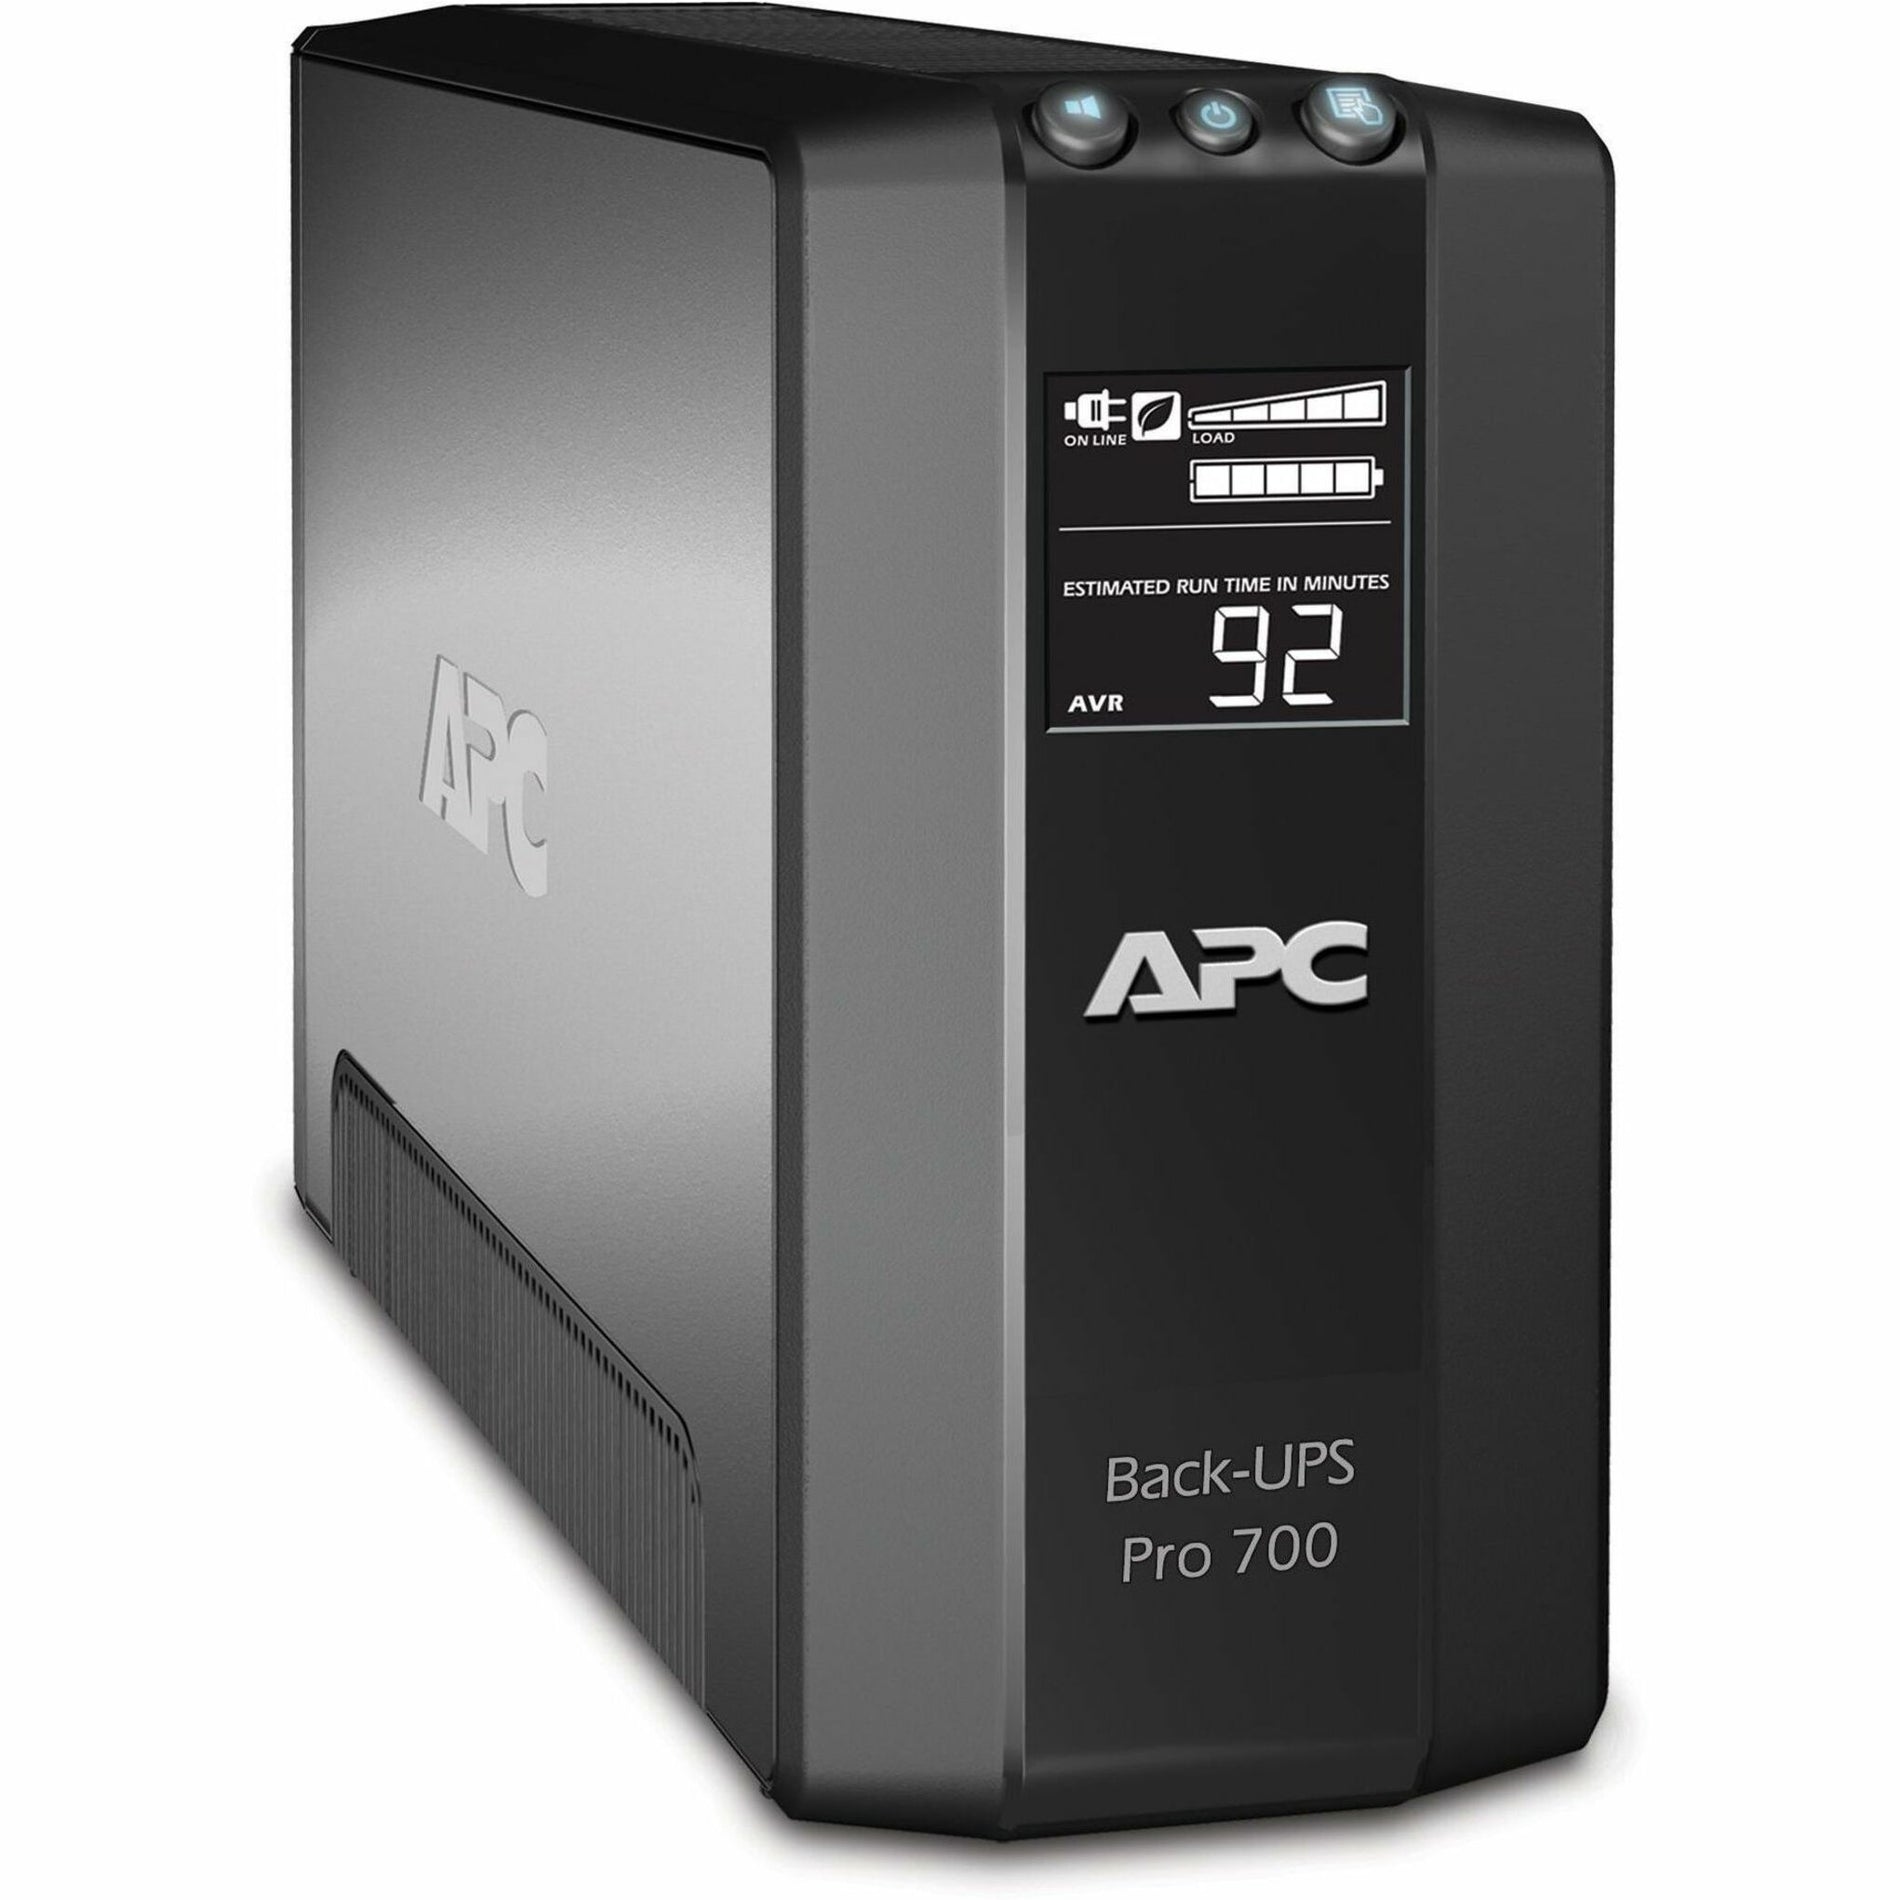 APC BR700G Back-UPS RS 700 VA Tower UPS, Energy Star Certified, USB and Serial Port, 3 Year Warranty